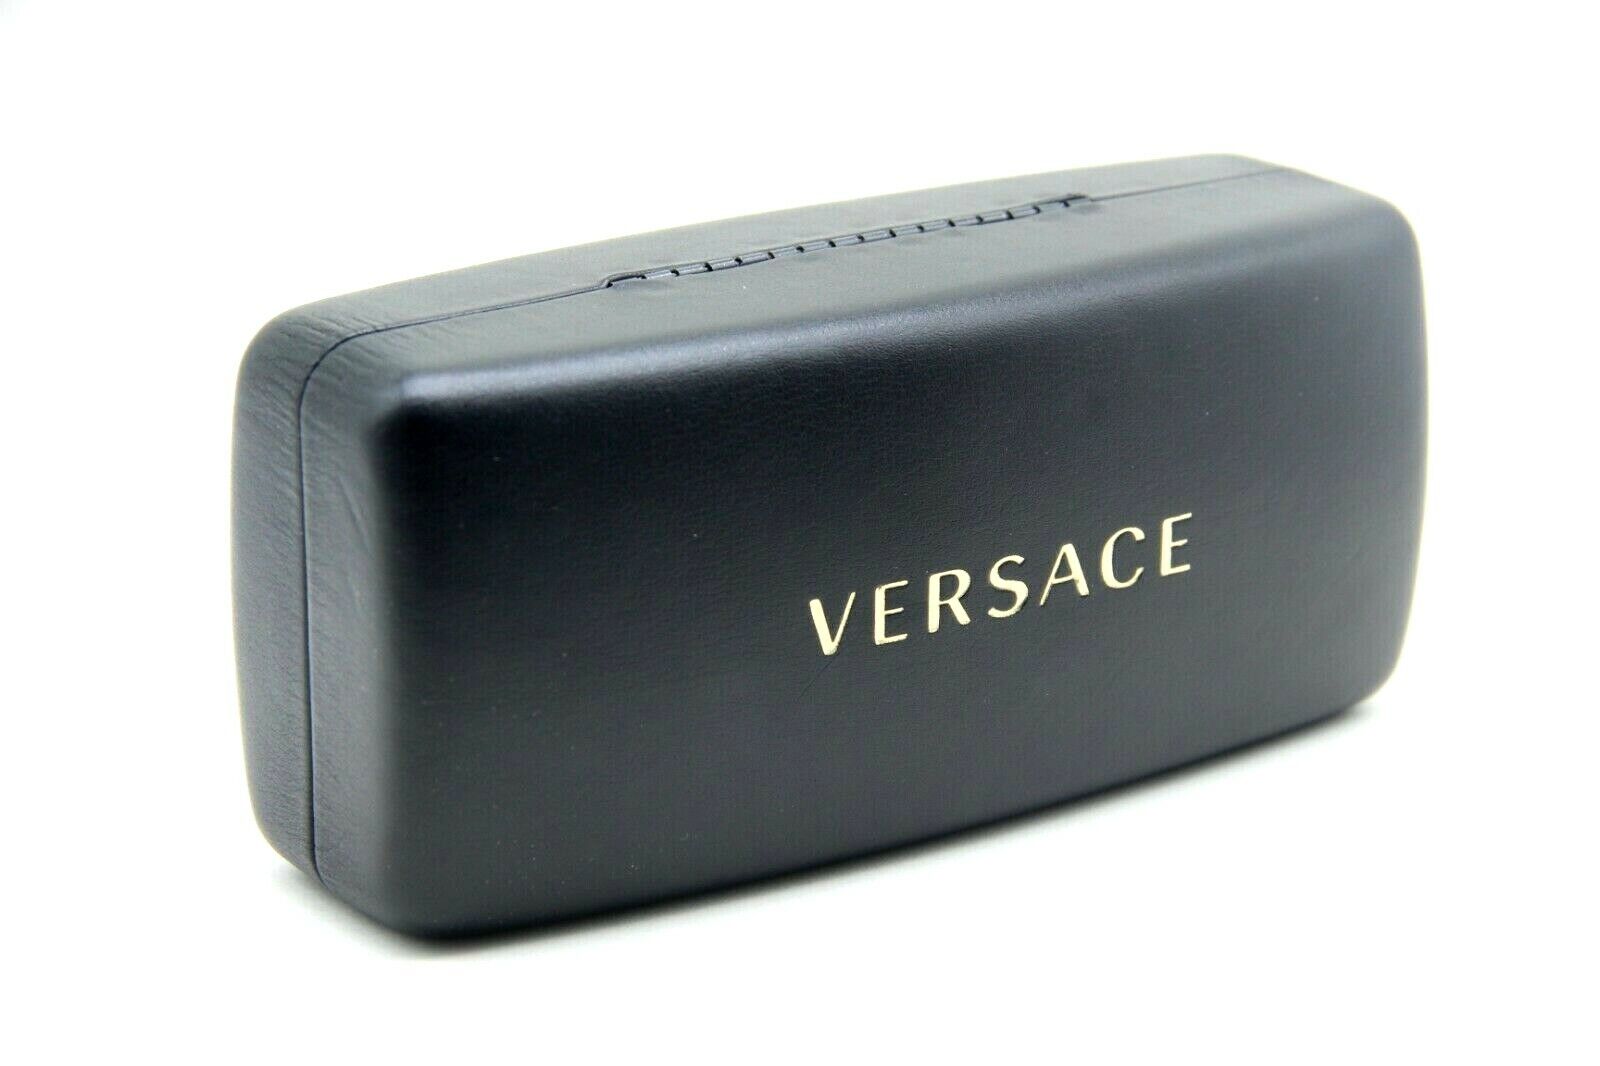 NEW VERSACE LARGE Price reduction AUTHENTIC EYEWEAR GLASSES EYEGLASSES CASE ONLY Now free shipping